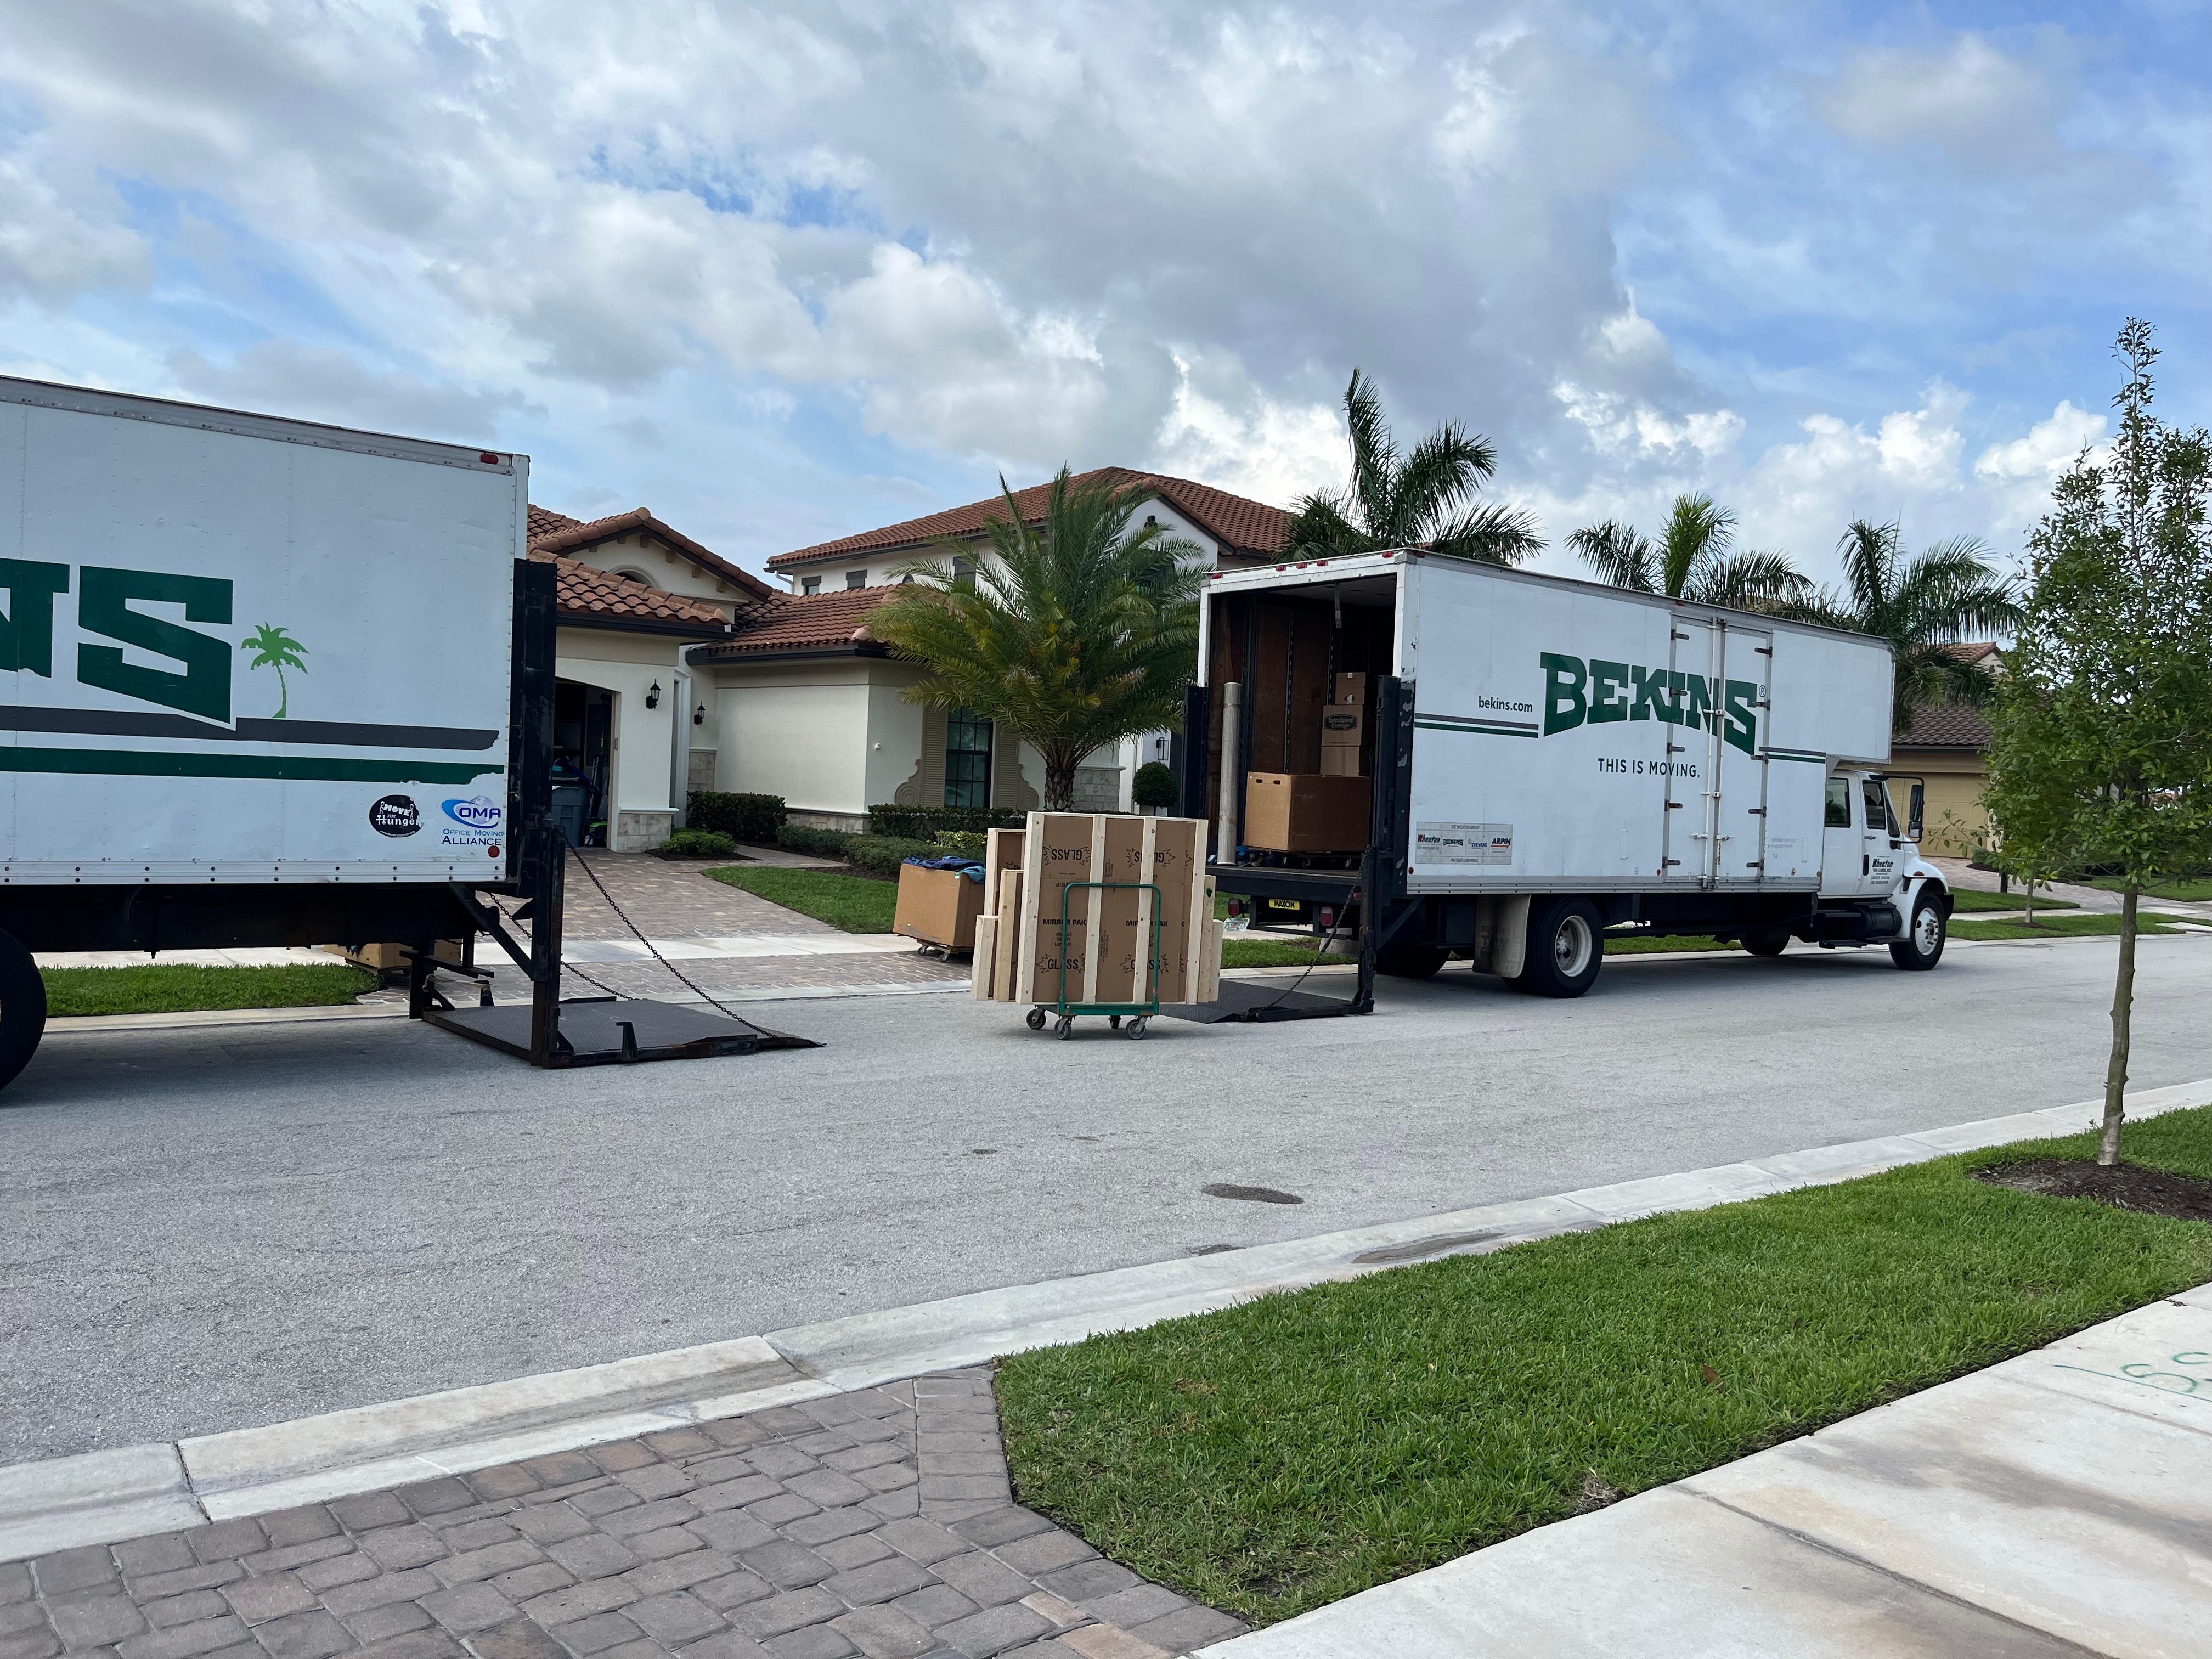 Another successful South Florida move!